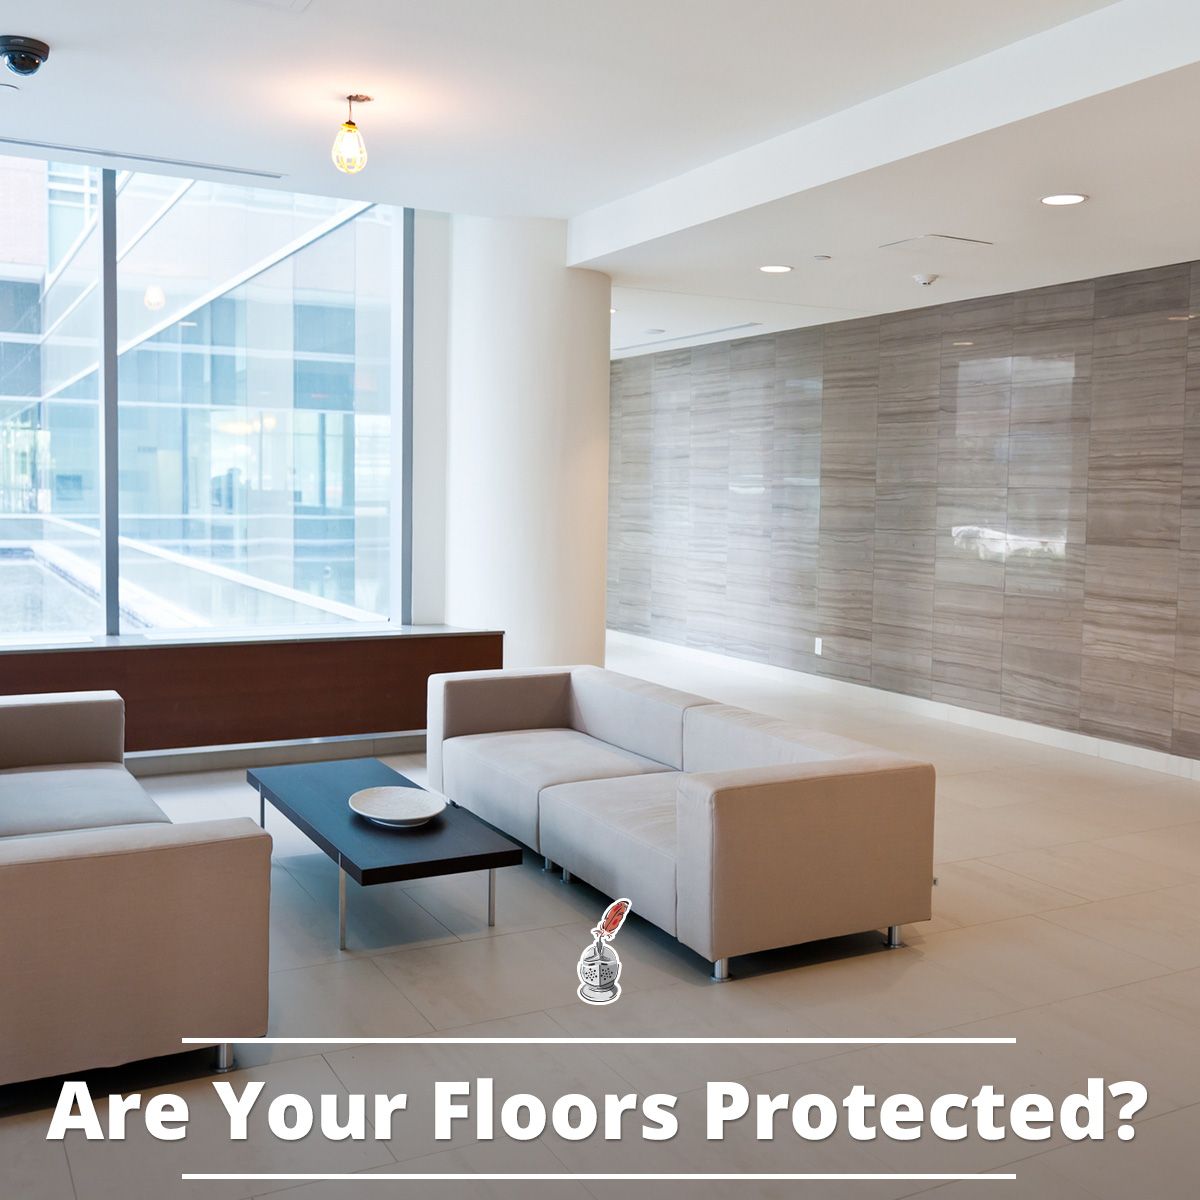 Are Your Floors Protected?